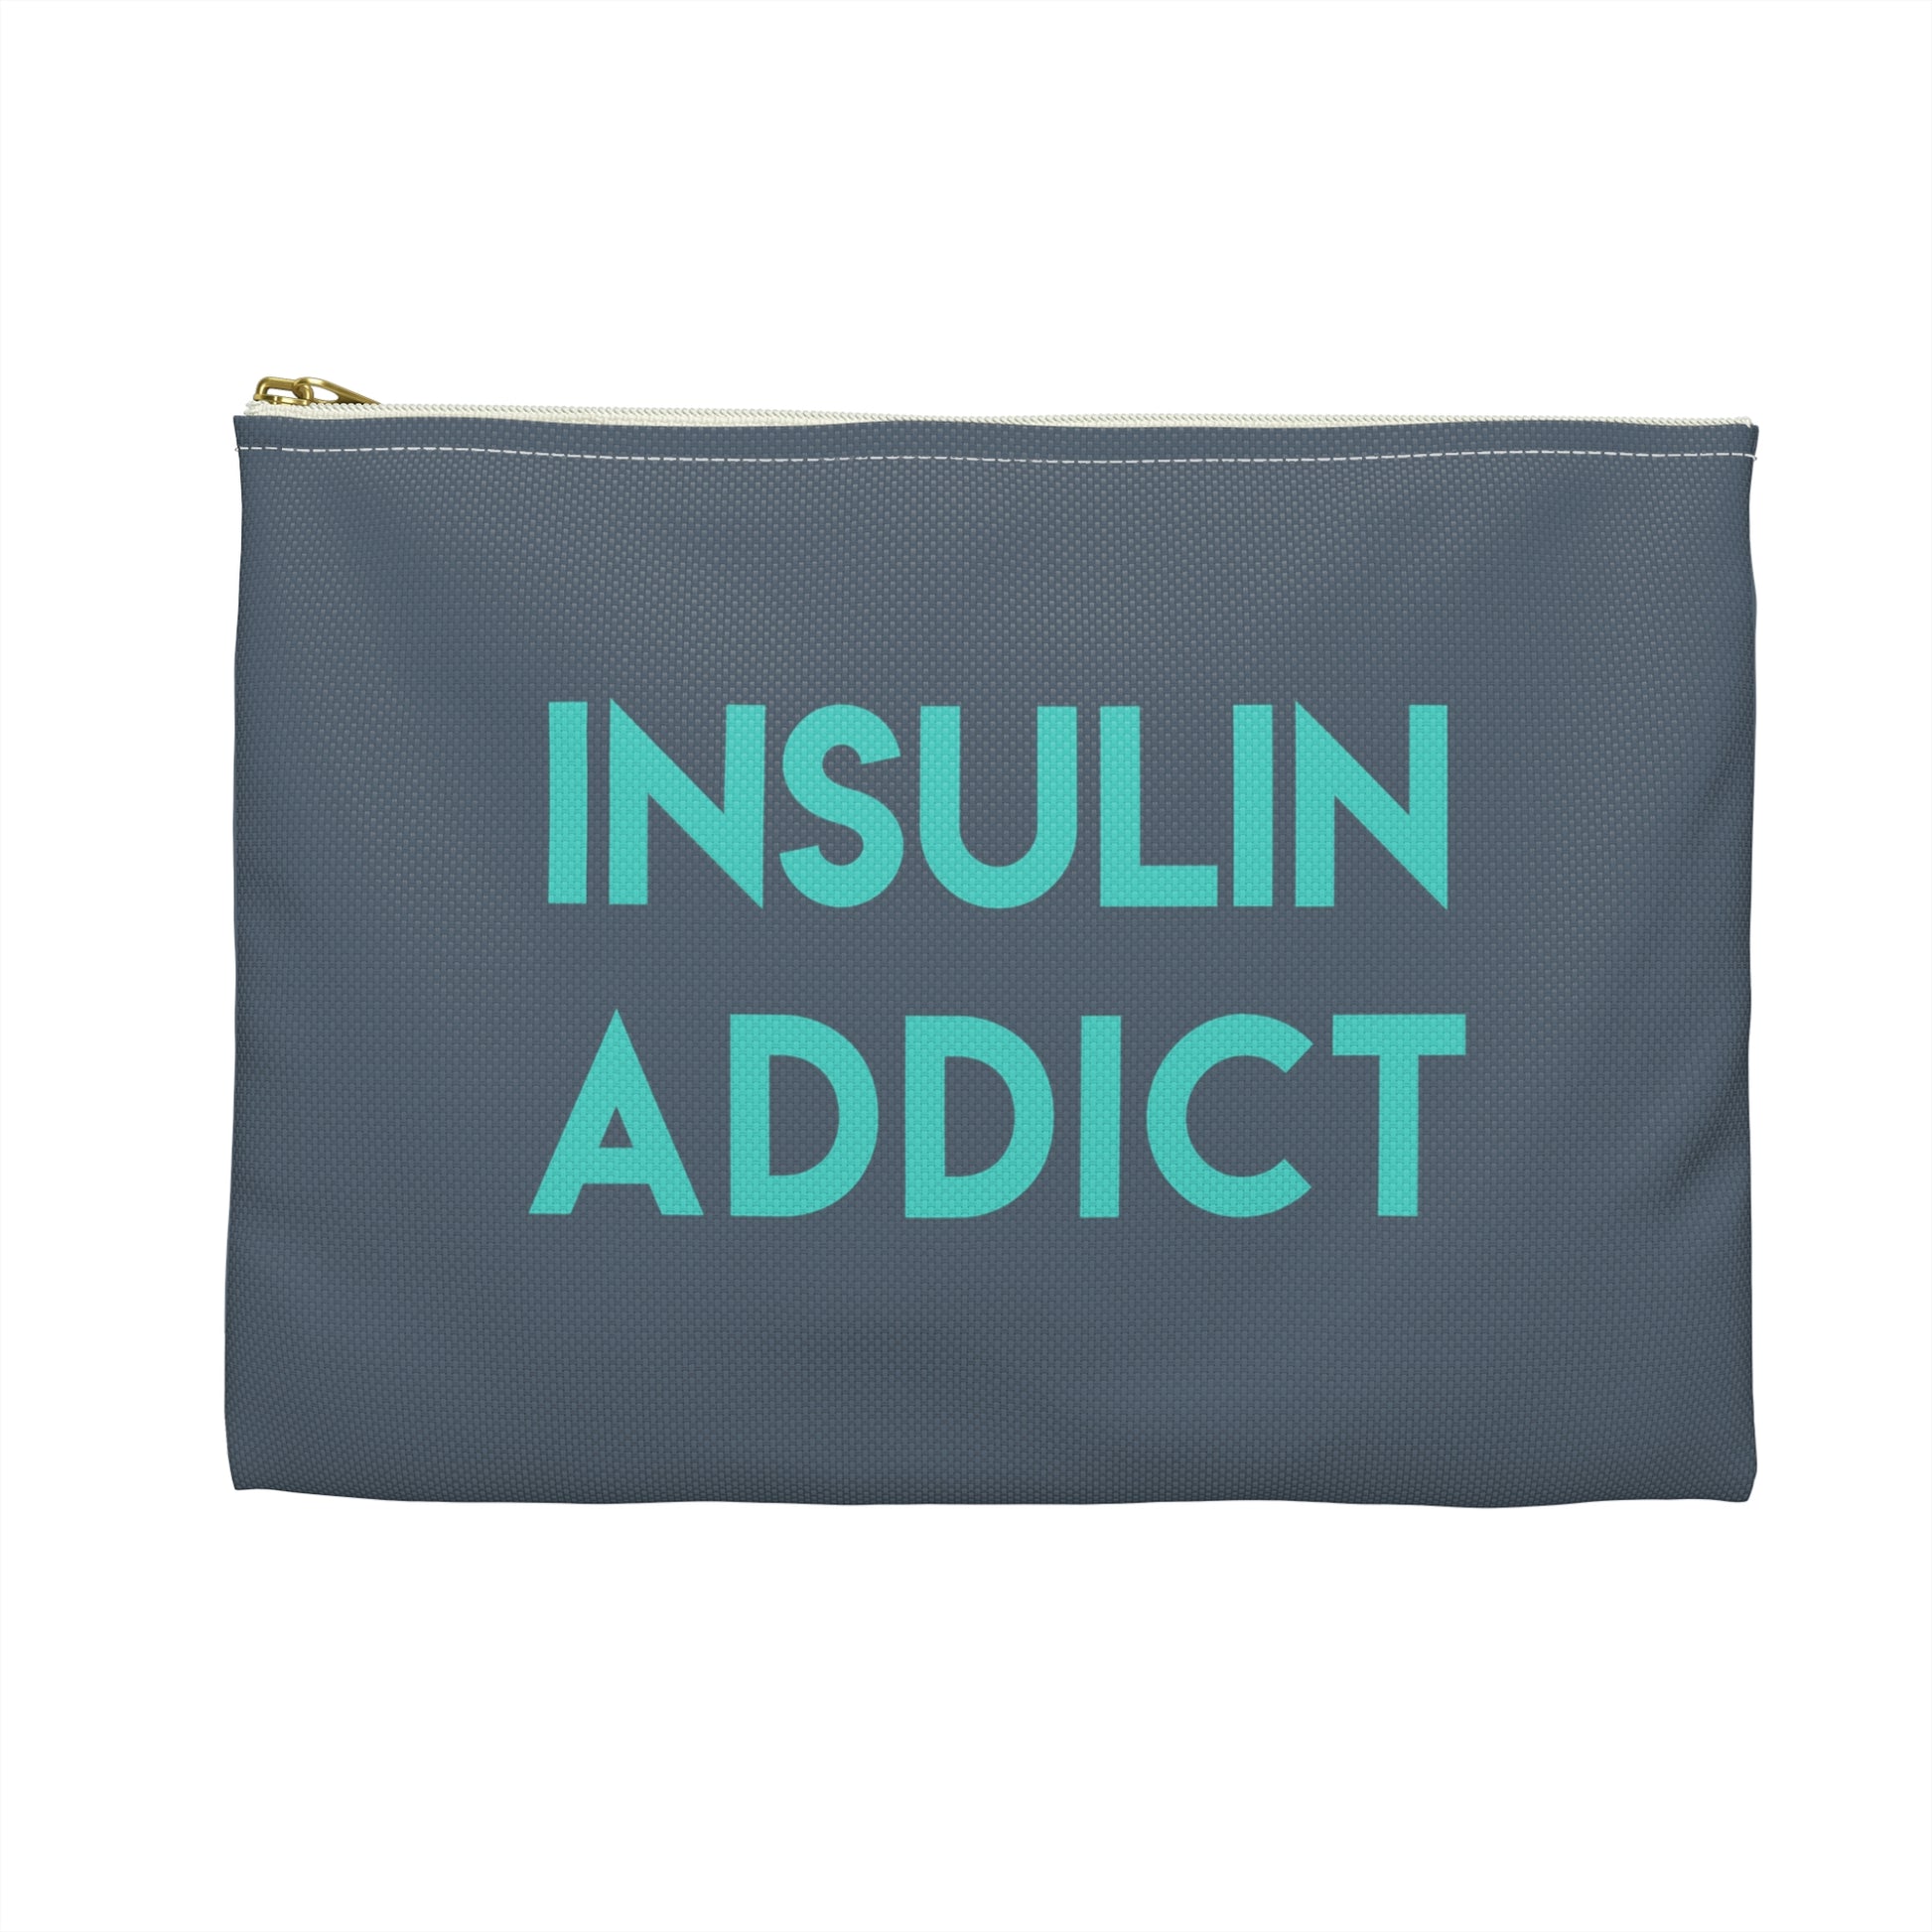 Insulin Addict Diabetes Bag, My Diabetic Supply Pouch Funny Case Type 1 2 One Accessory Zipper Travel Small Large Pouch Gift Starcove Fashion